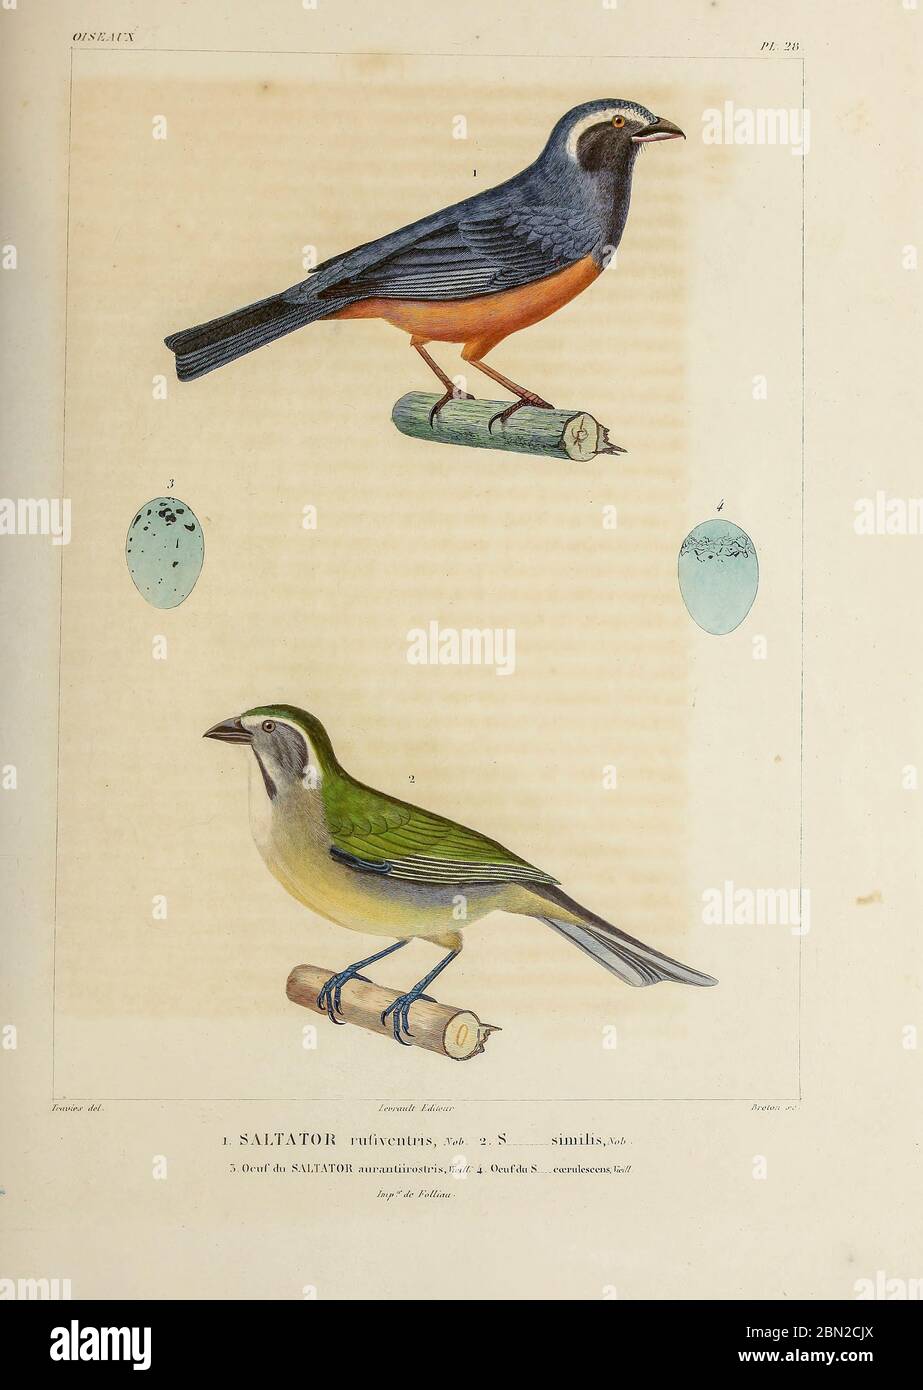 hand coloured sketch Top: rufous-bellied mountain tanager or rufous-bellied saltator (Pseudosaltator rufiventris) [Here as Saltator rufiventris]) Bottom:  Green-winged Saltator (Saltator similis) From the book 'Voyage dans l'Amérique Méridionale' [Journey to South America: (Brazil, the eastern republic of Uruguay, the Argentine Republic, Patagonia, the republic of Chile, the republic of Bolivia, the republic of Peru), executed during the years 1826 - 1833] 4th volume Part 3 By: Orbigny, Alcide Dessalines d', d'Orbigny, 1802-1857; Montagne, Jean François Camille, 1784-1866; Martius, Karl Fried Stock Photo